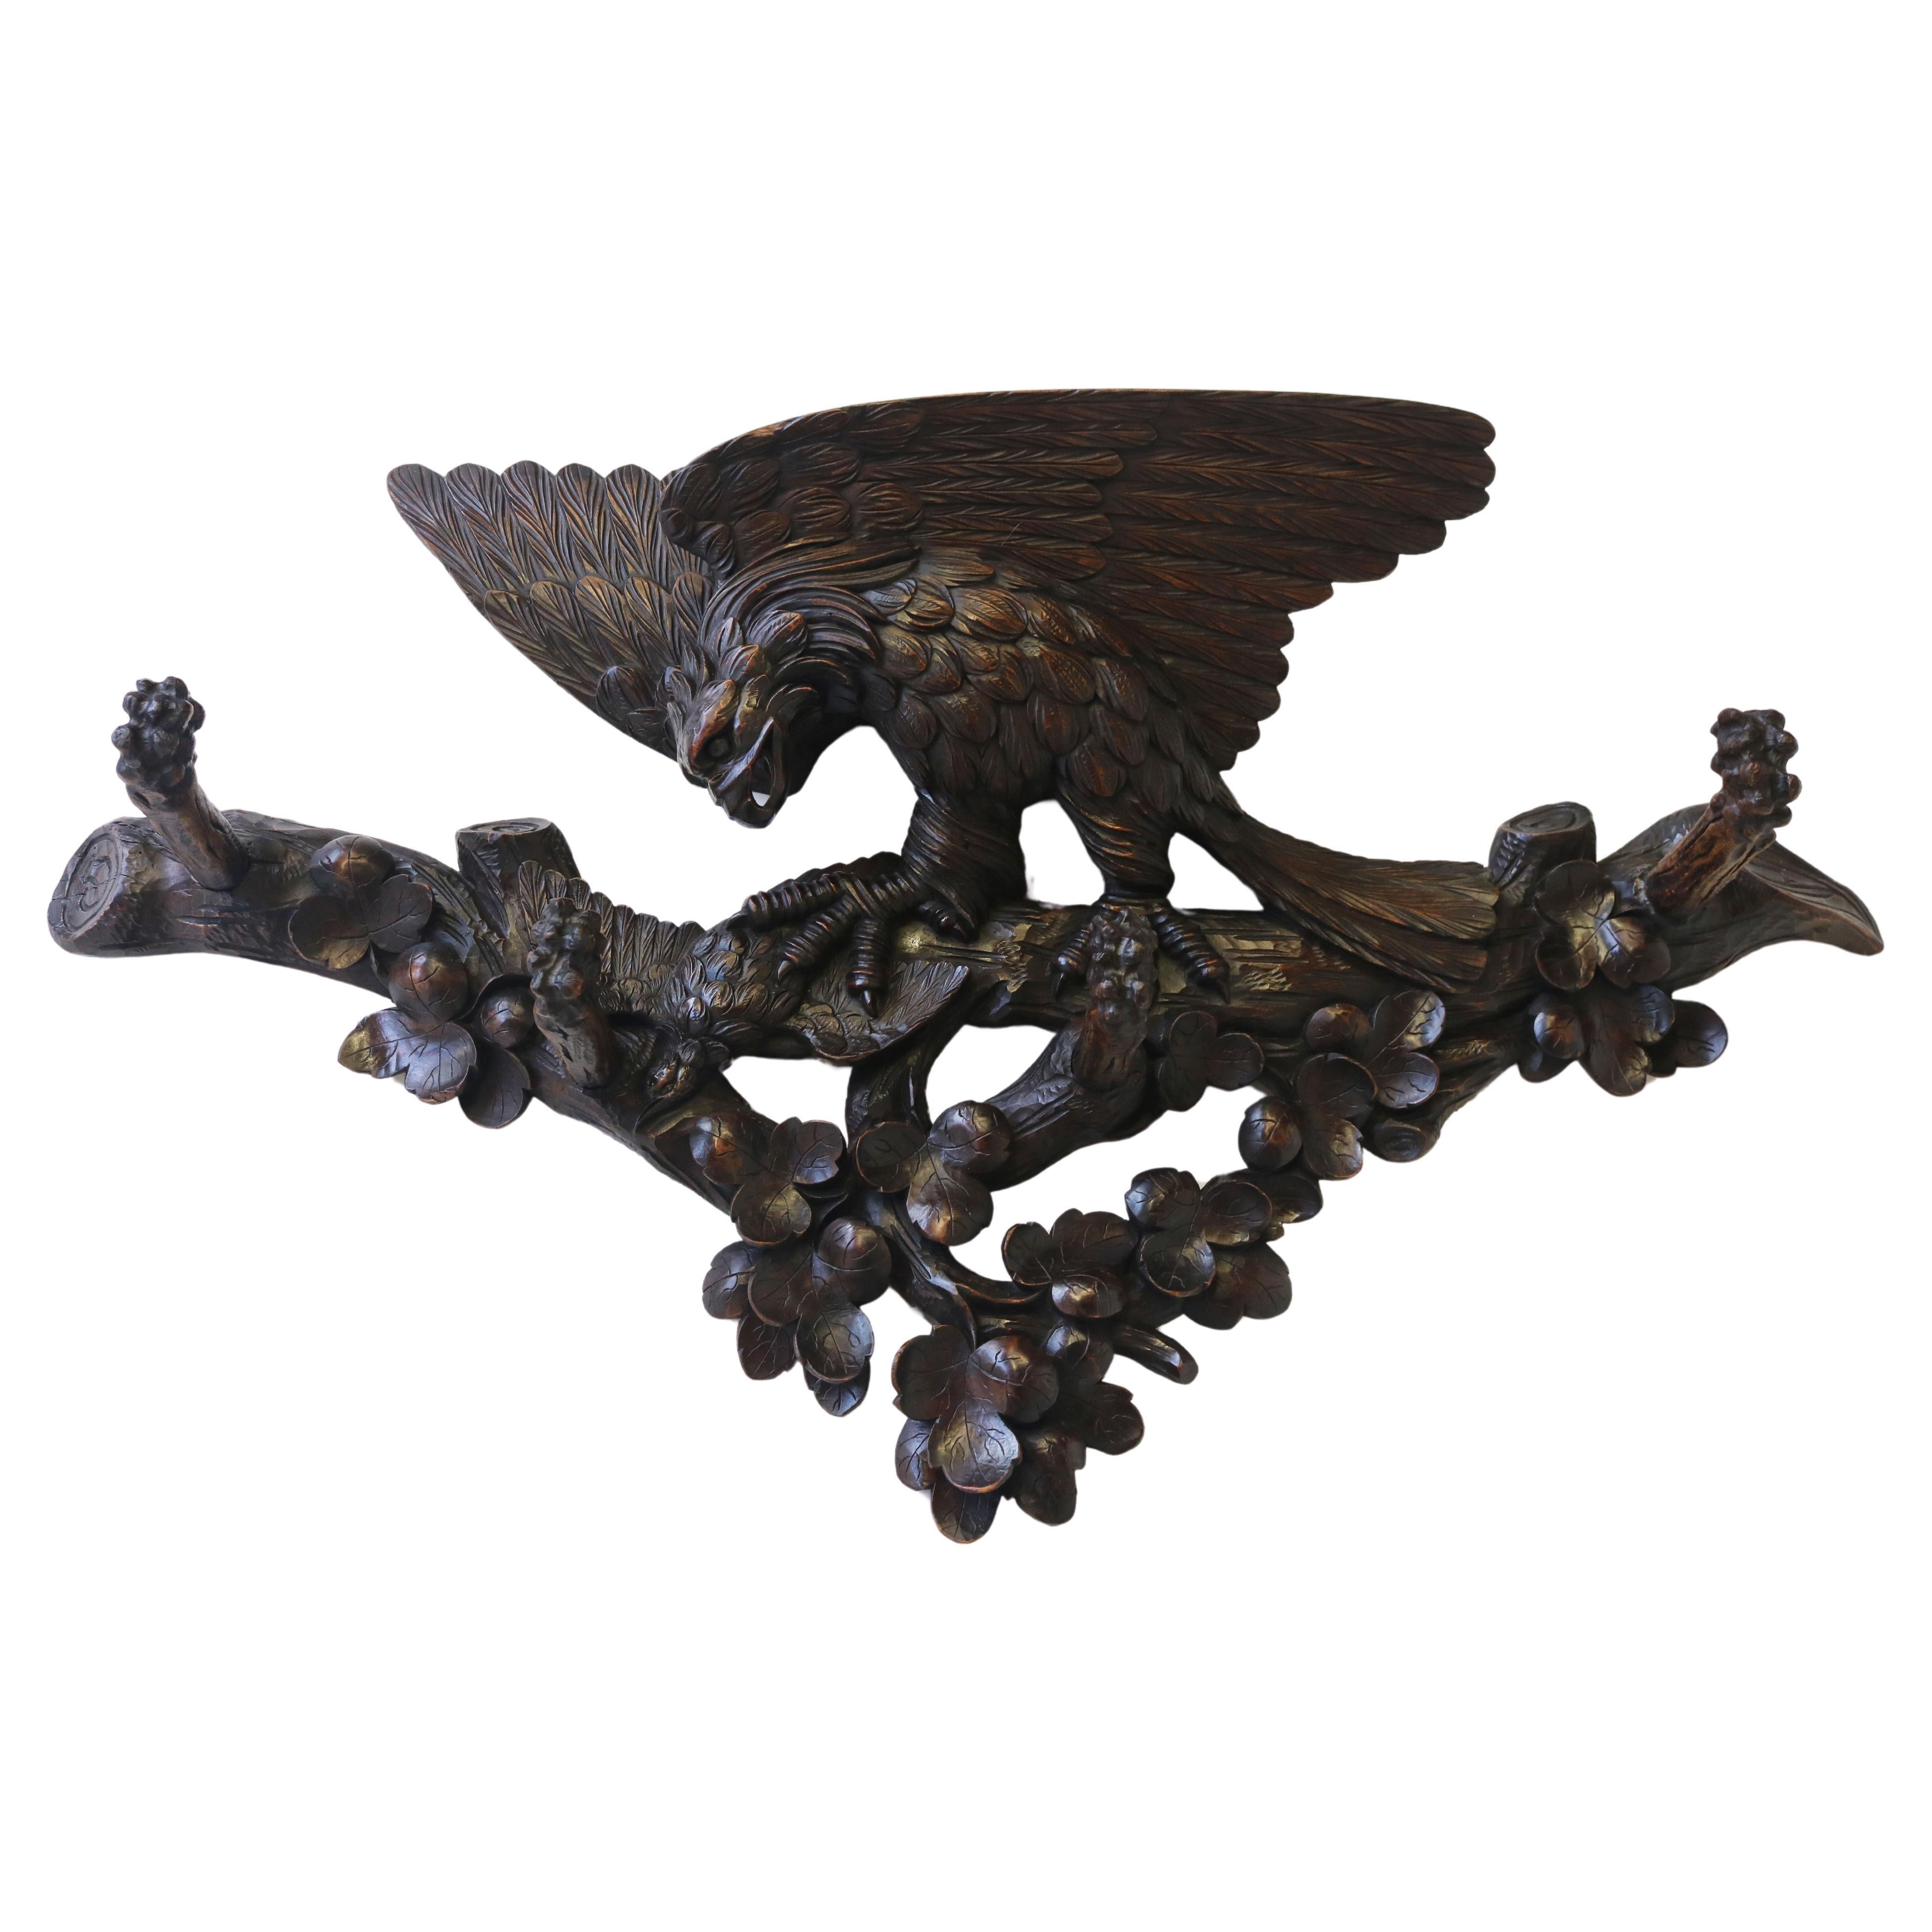 Exquisite 19th century Swiss Black Forest Coat rack carved eagle hallway antique For Sale